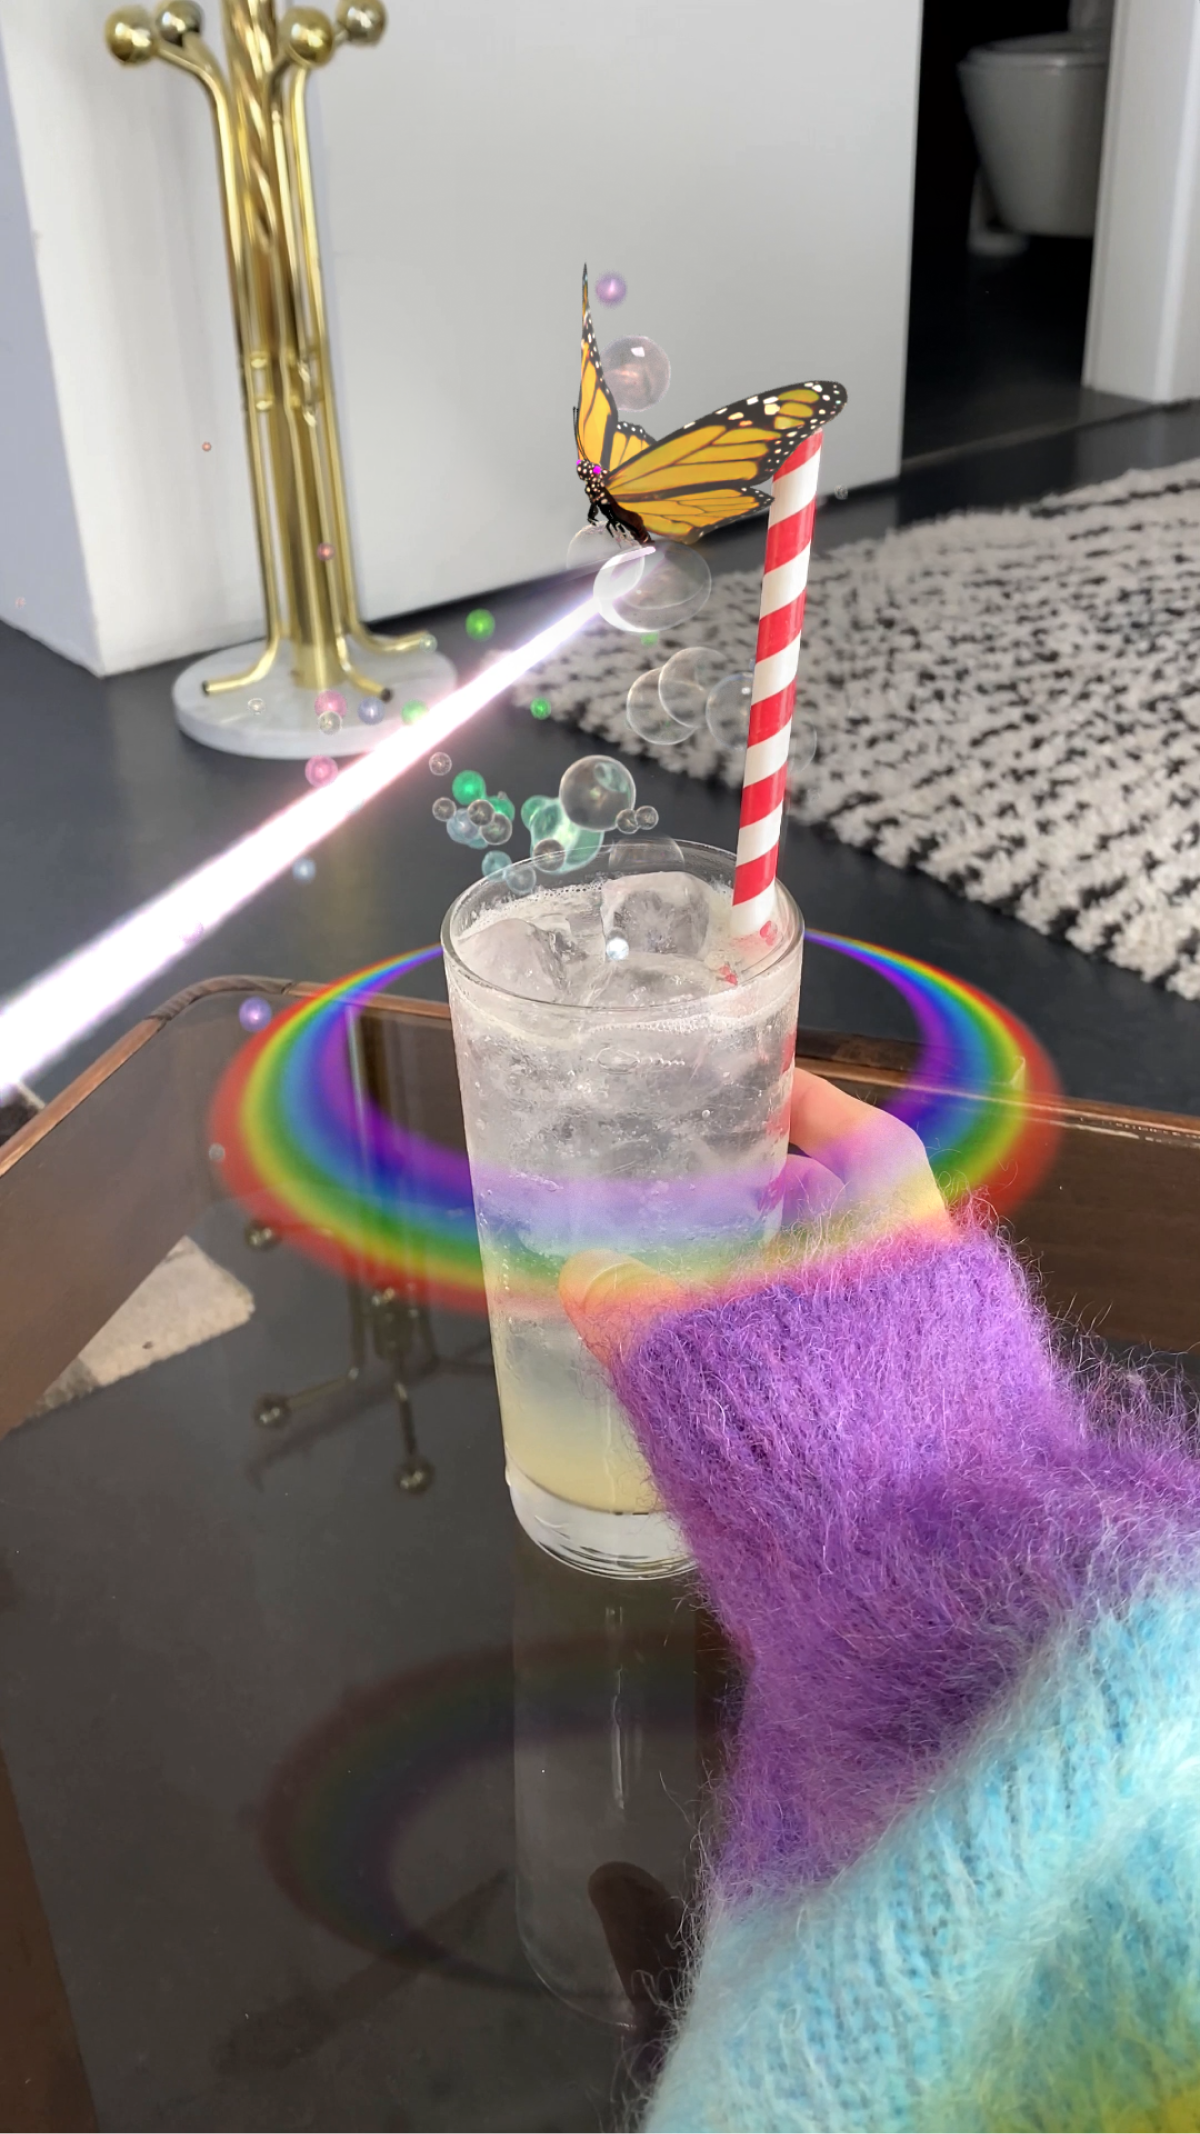 Bubbly Fuzzy mixed reality cocktail was created for the ODDS event in Marfa. The cocktail features an AR filter inspired by different types of ODDS smart clothing sweaters.